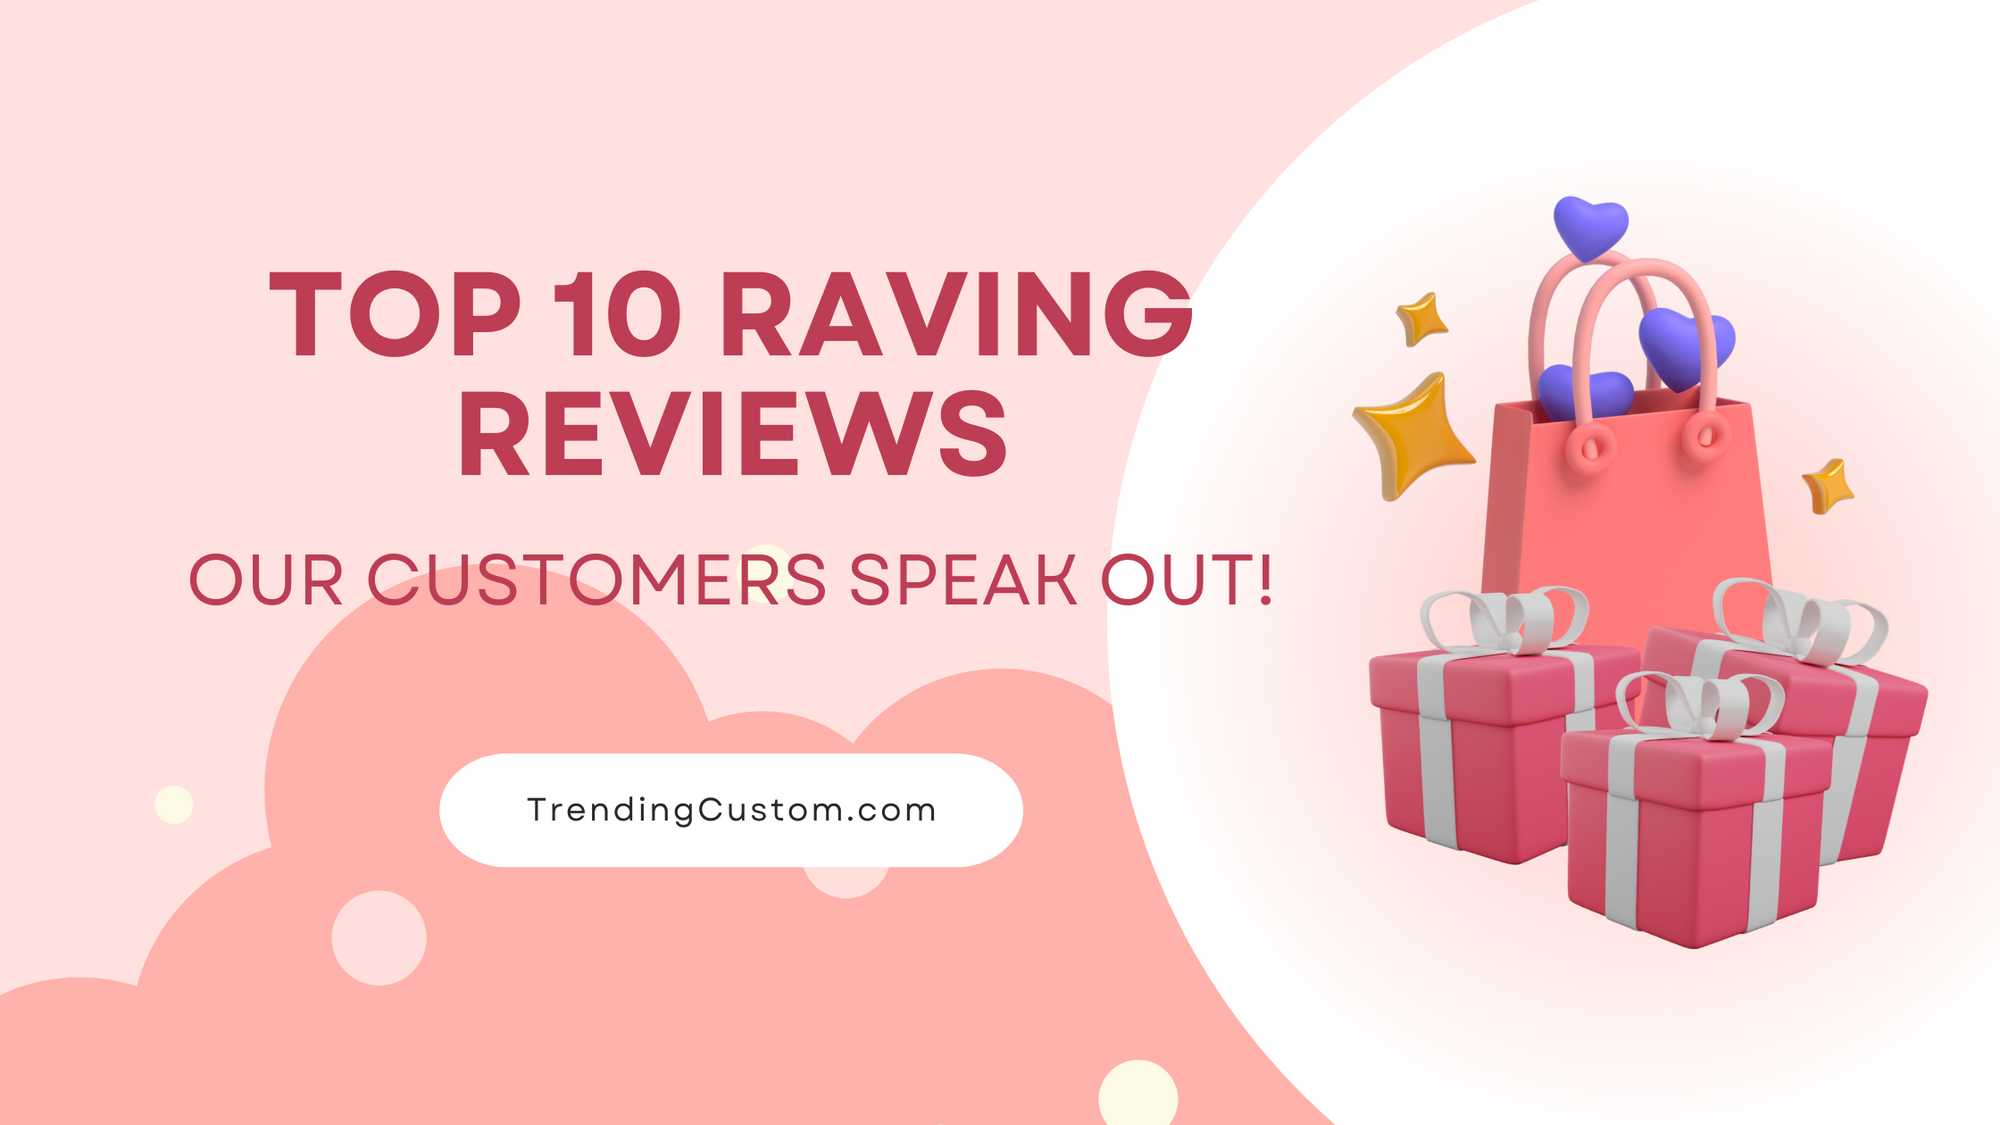 Top 10 Raving Reviews: Our Customers Speak Out! - February 18th